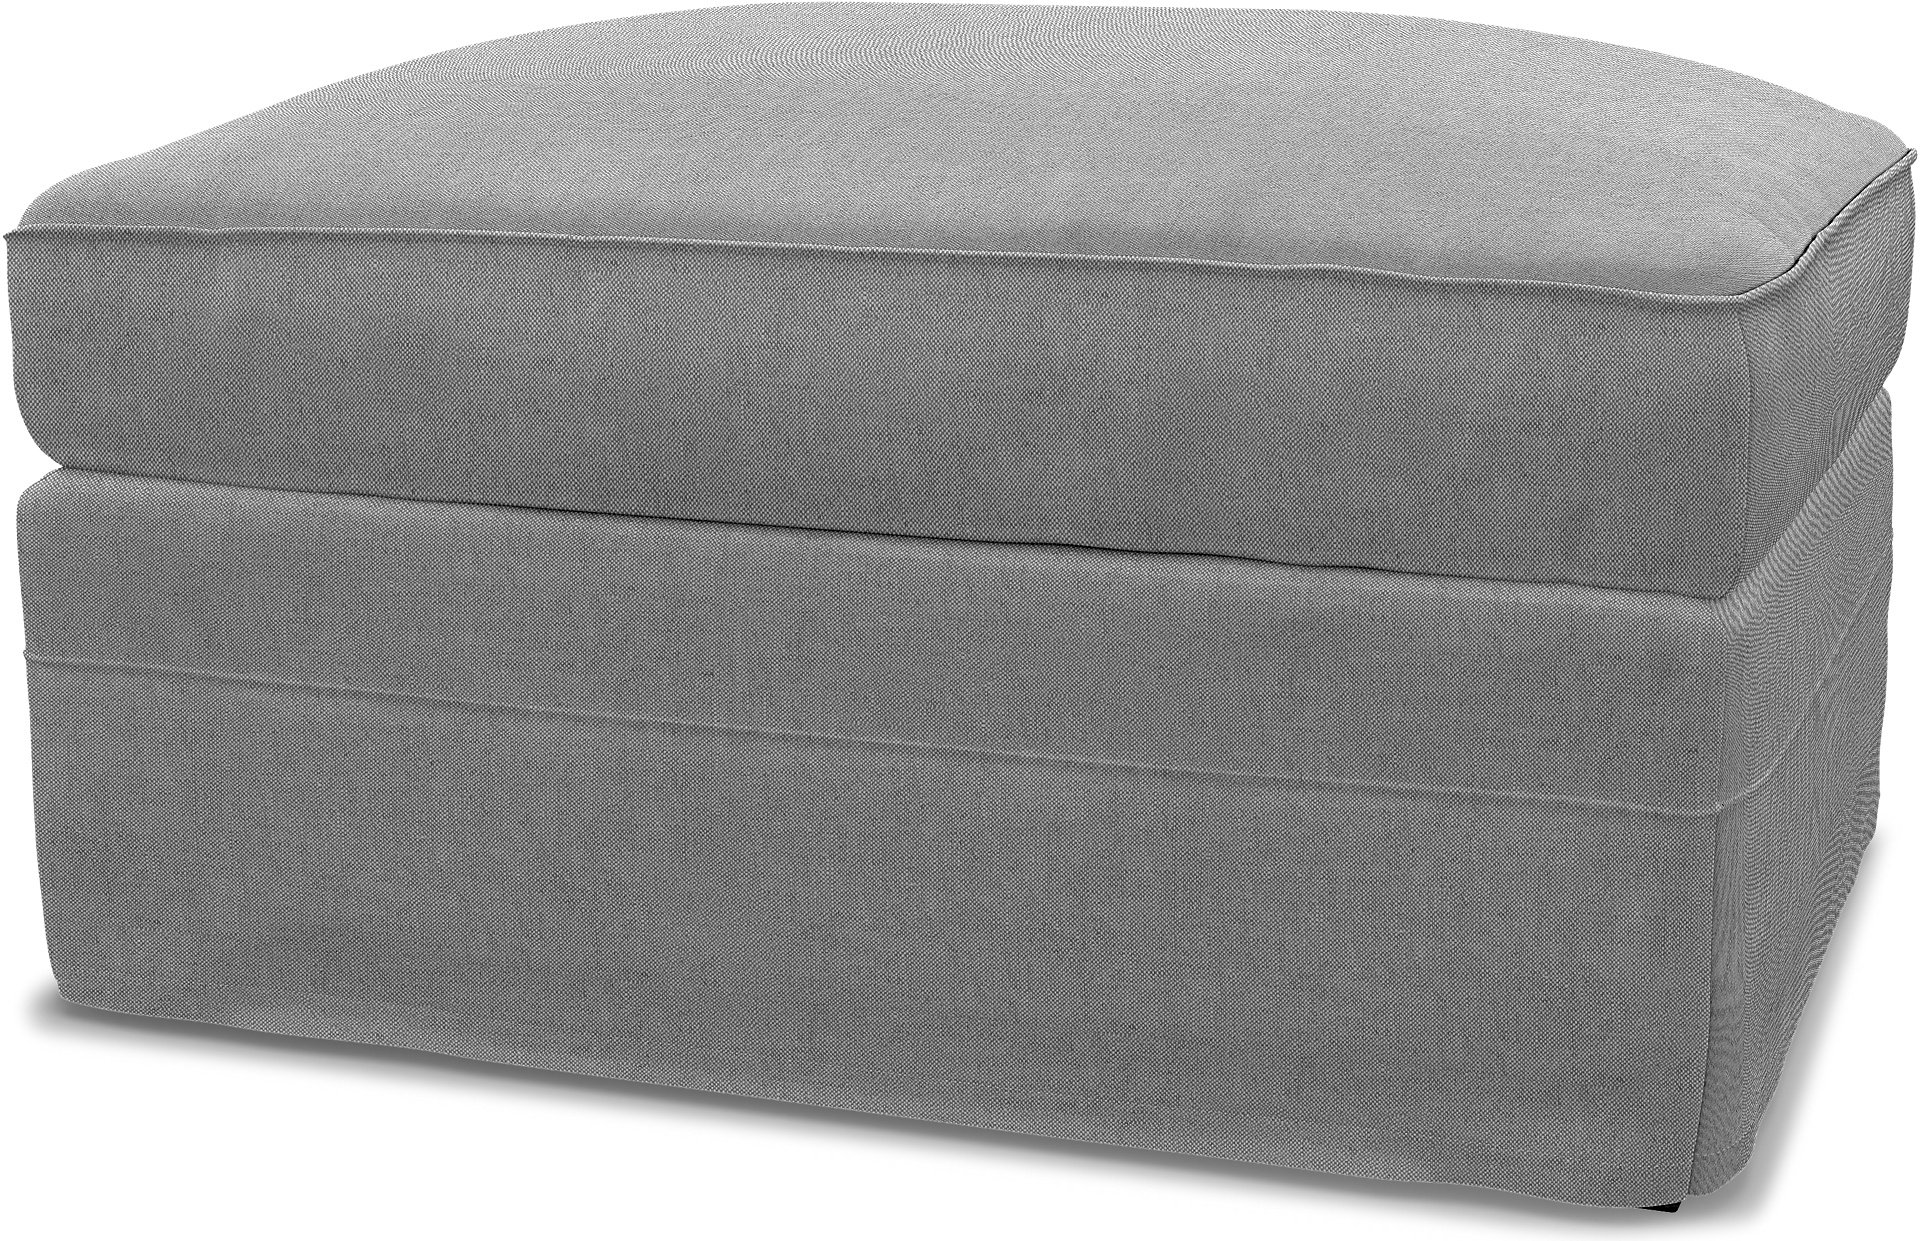 IKEA - Gronlid Footstool with Storage Cover, Graphite, Linen - Bemz